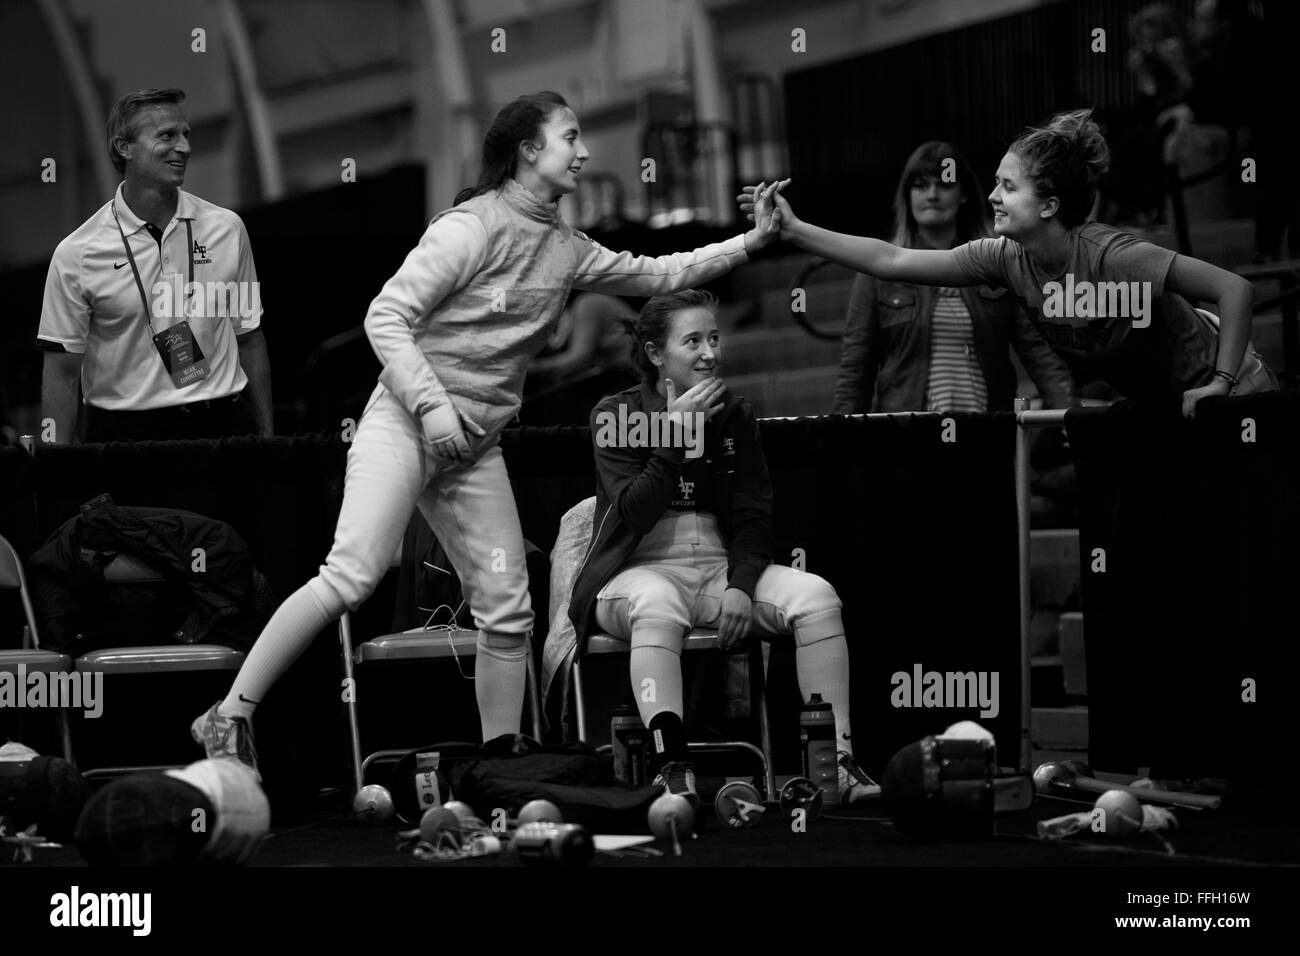 Madeleine Girardot high fives a friend from another college after winning a match during the 2014 NCAA Fencing Championships at Ohio State University in Columbus, Ohio. Girardot is a sophomore cadet at the Air Force Academy. Stock Photo